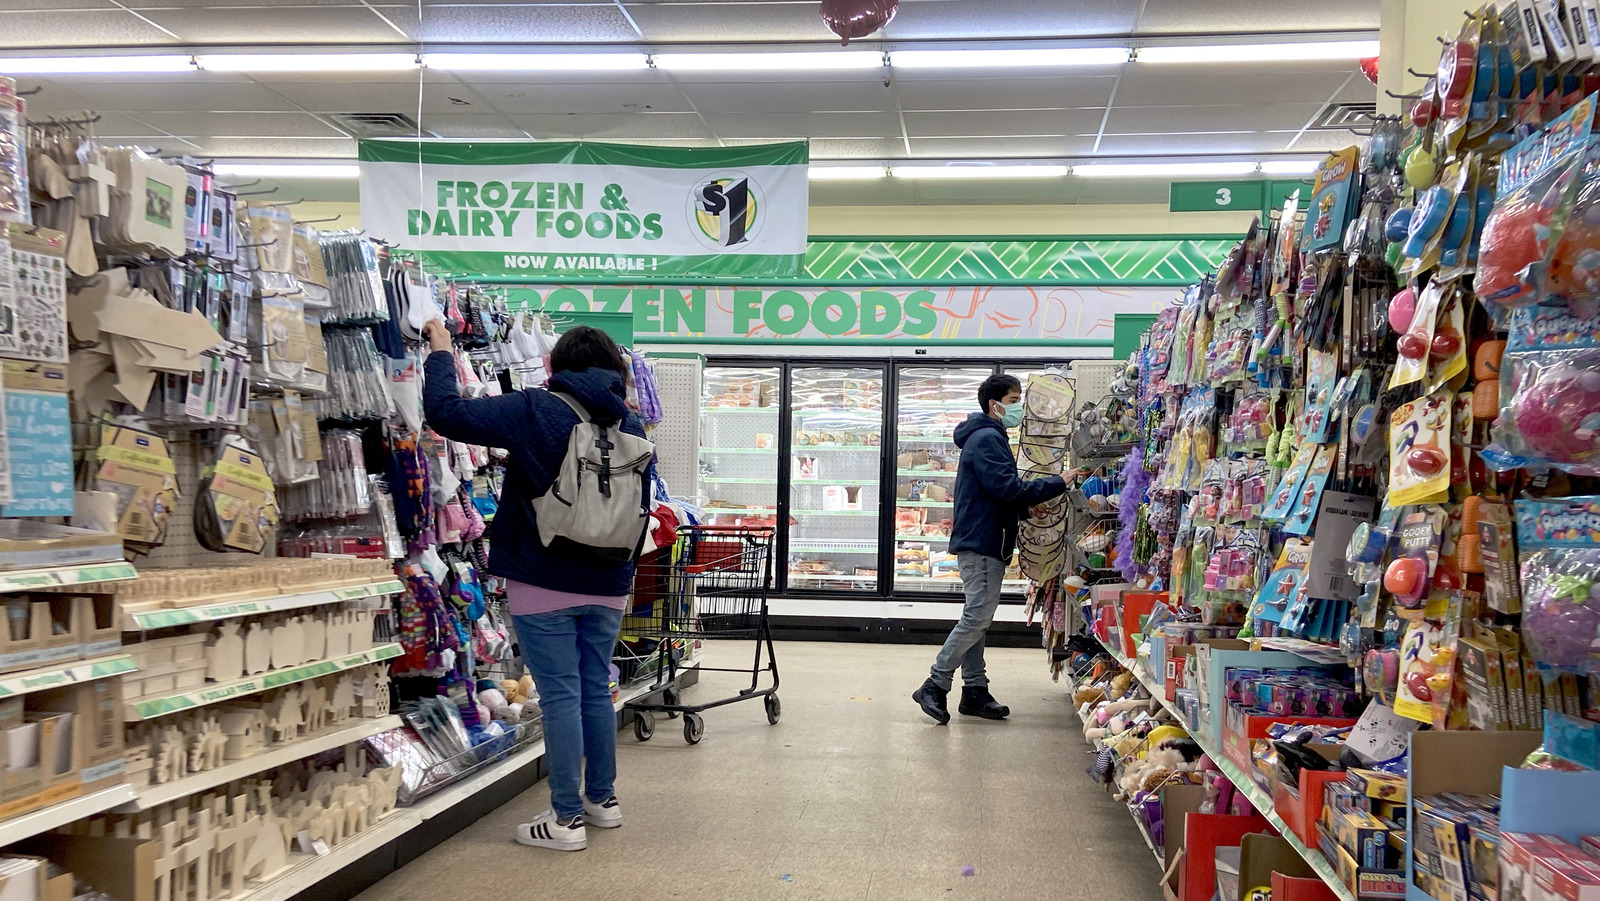 Dollar Tree Has Deals On NameBrand Frozen Foods — But There's A Catch